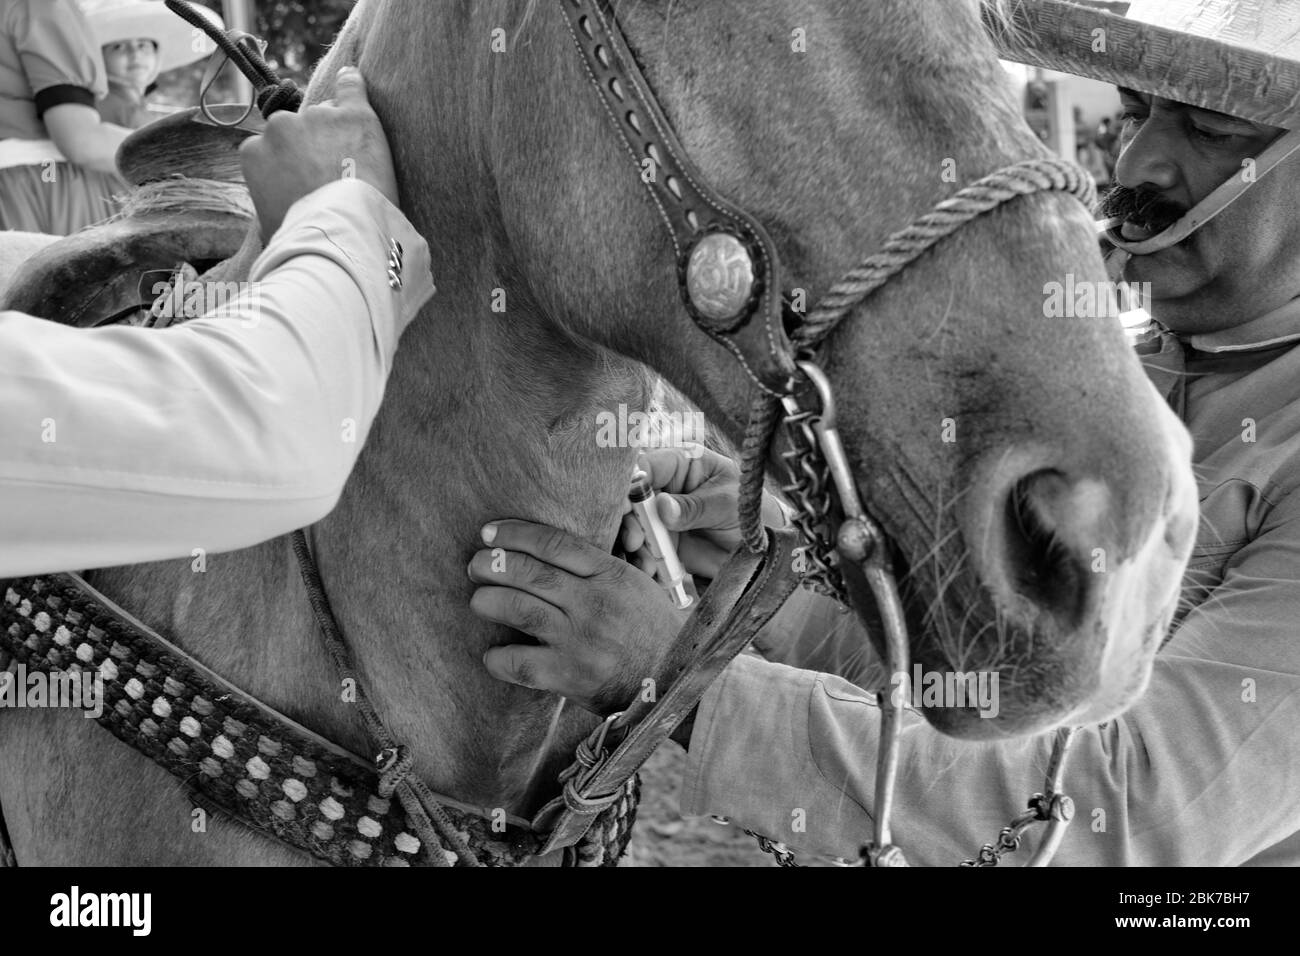 Vet injecting a horse during a 'charreria'. Charrerias are the Mexican equivalent of rodeos. For three days the participants struggled to obtain the m Stock Photo